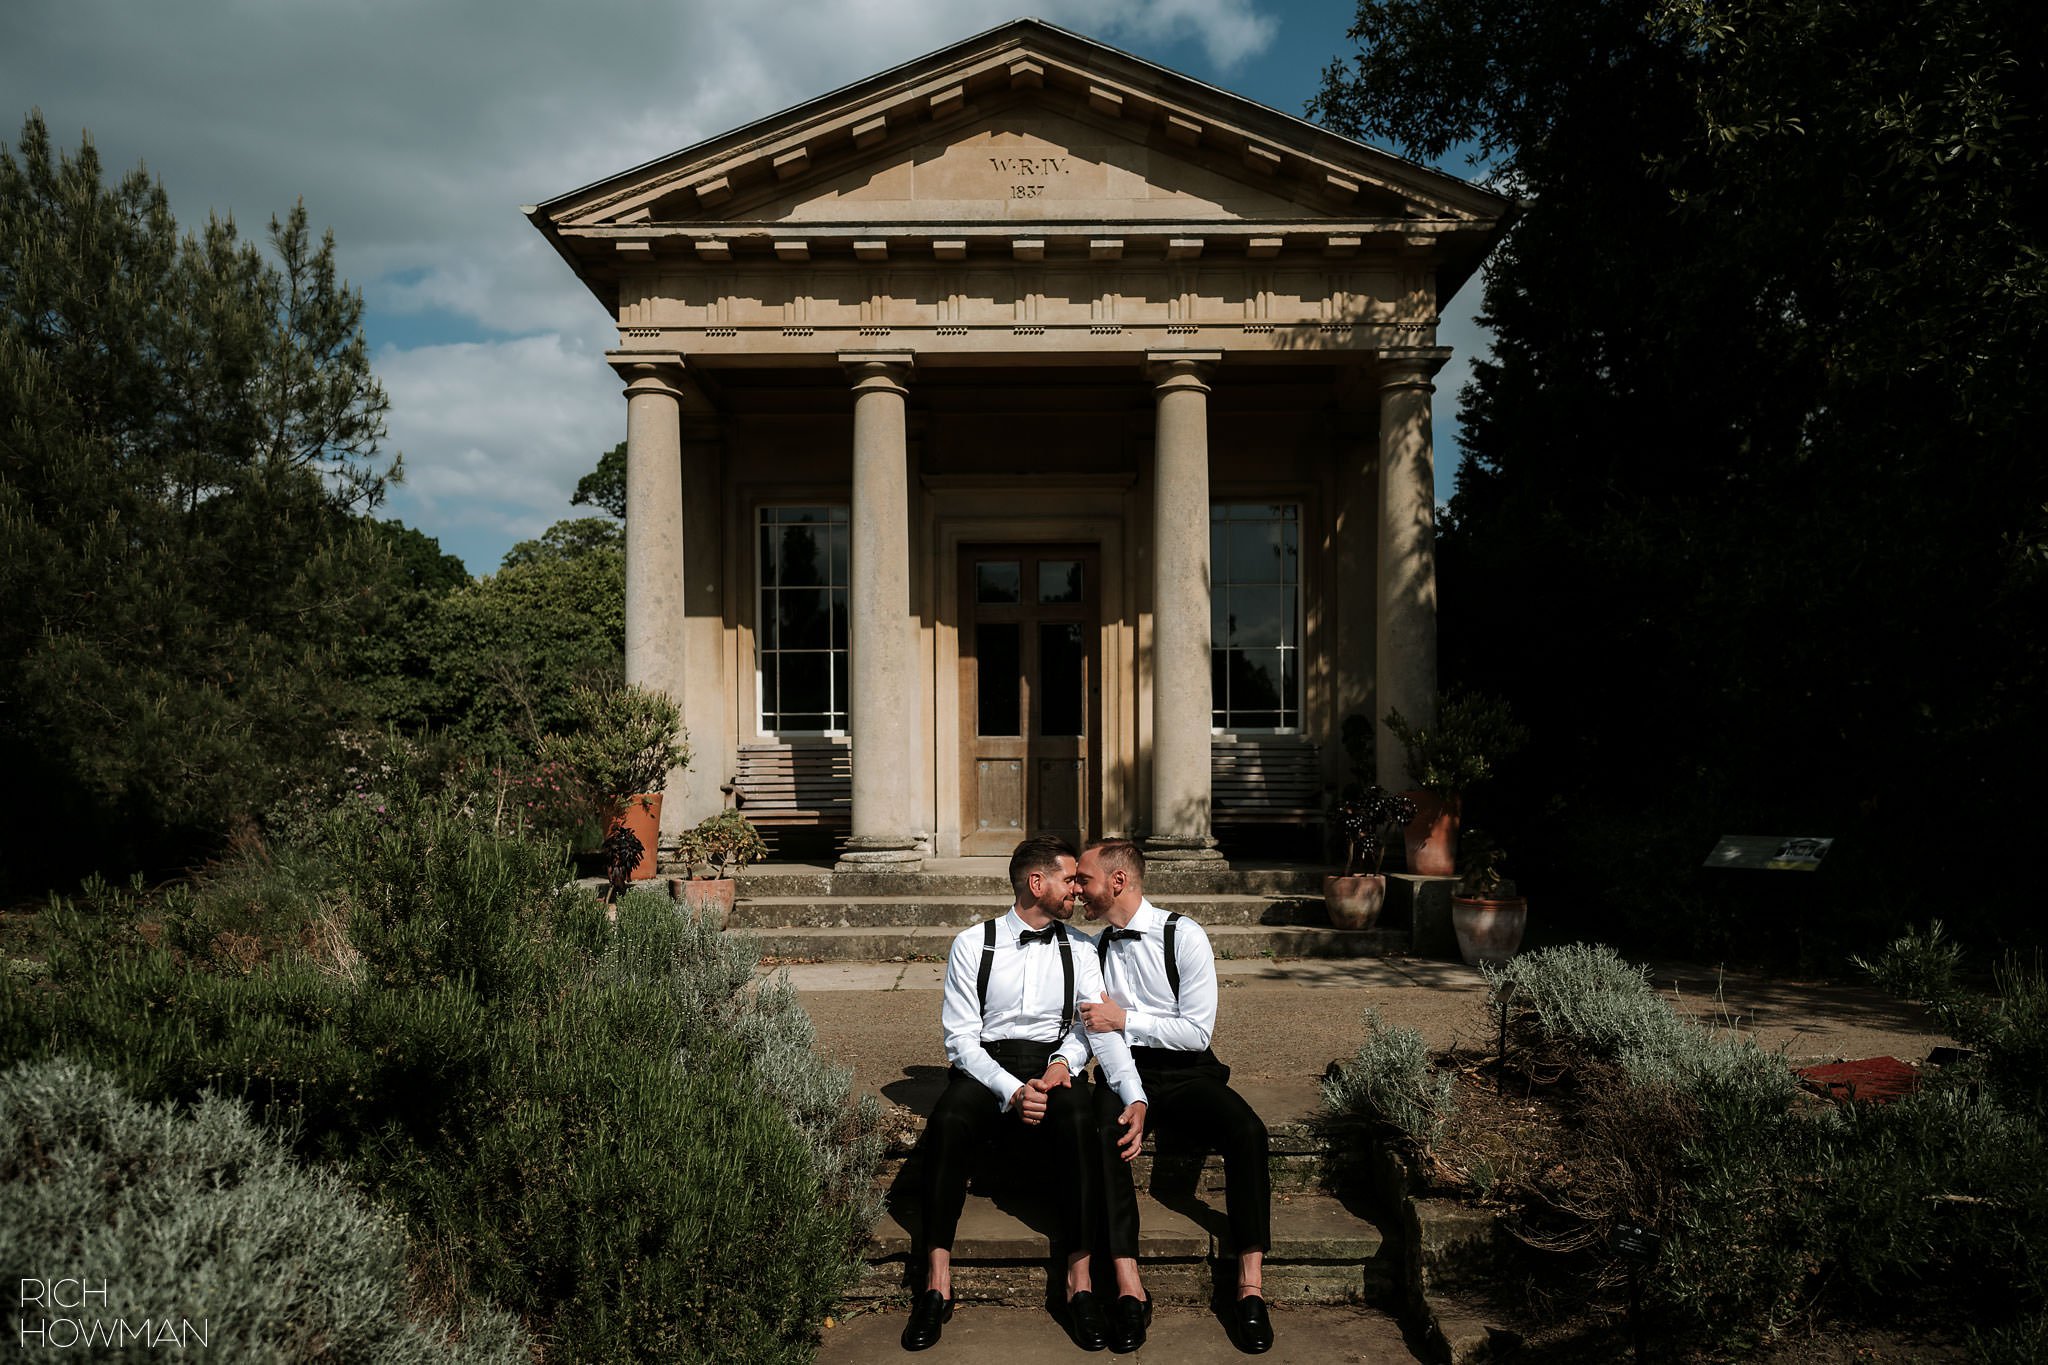 newly married couple sitting on the steps of king william's temple at Kew Gardens after their ceremony captured by cambridge cottage wedding photographer, Rich Howman